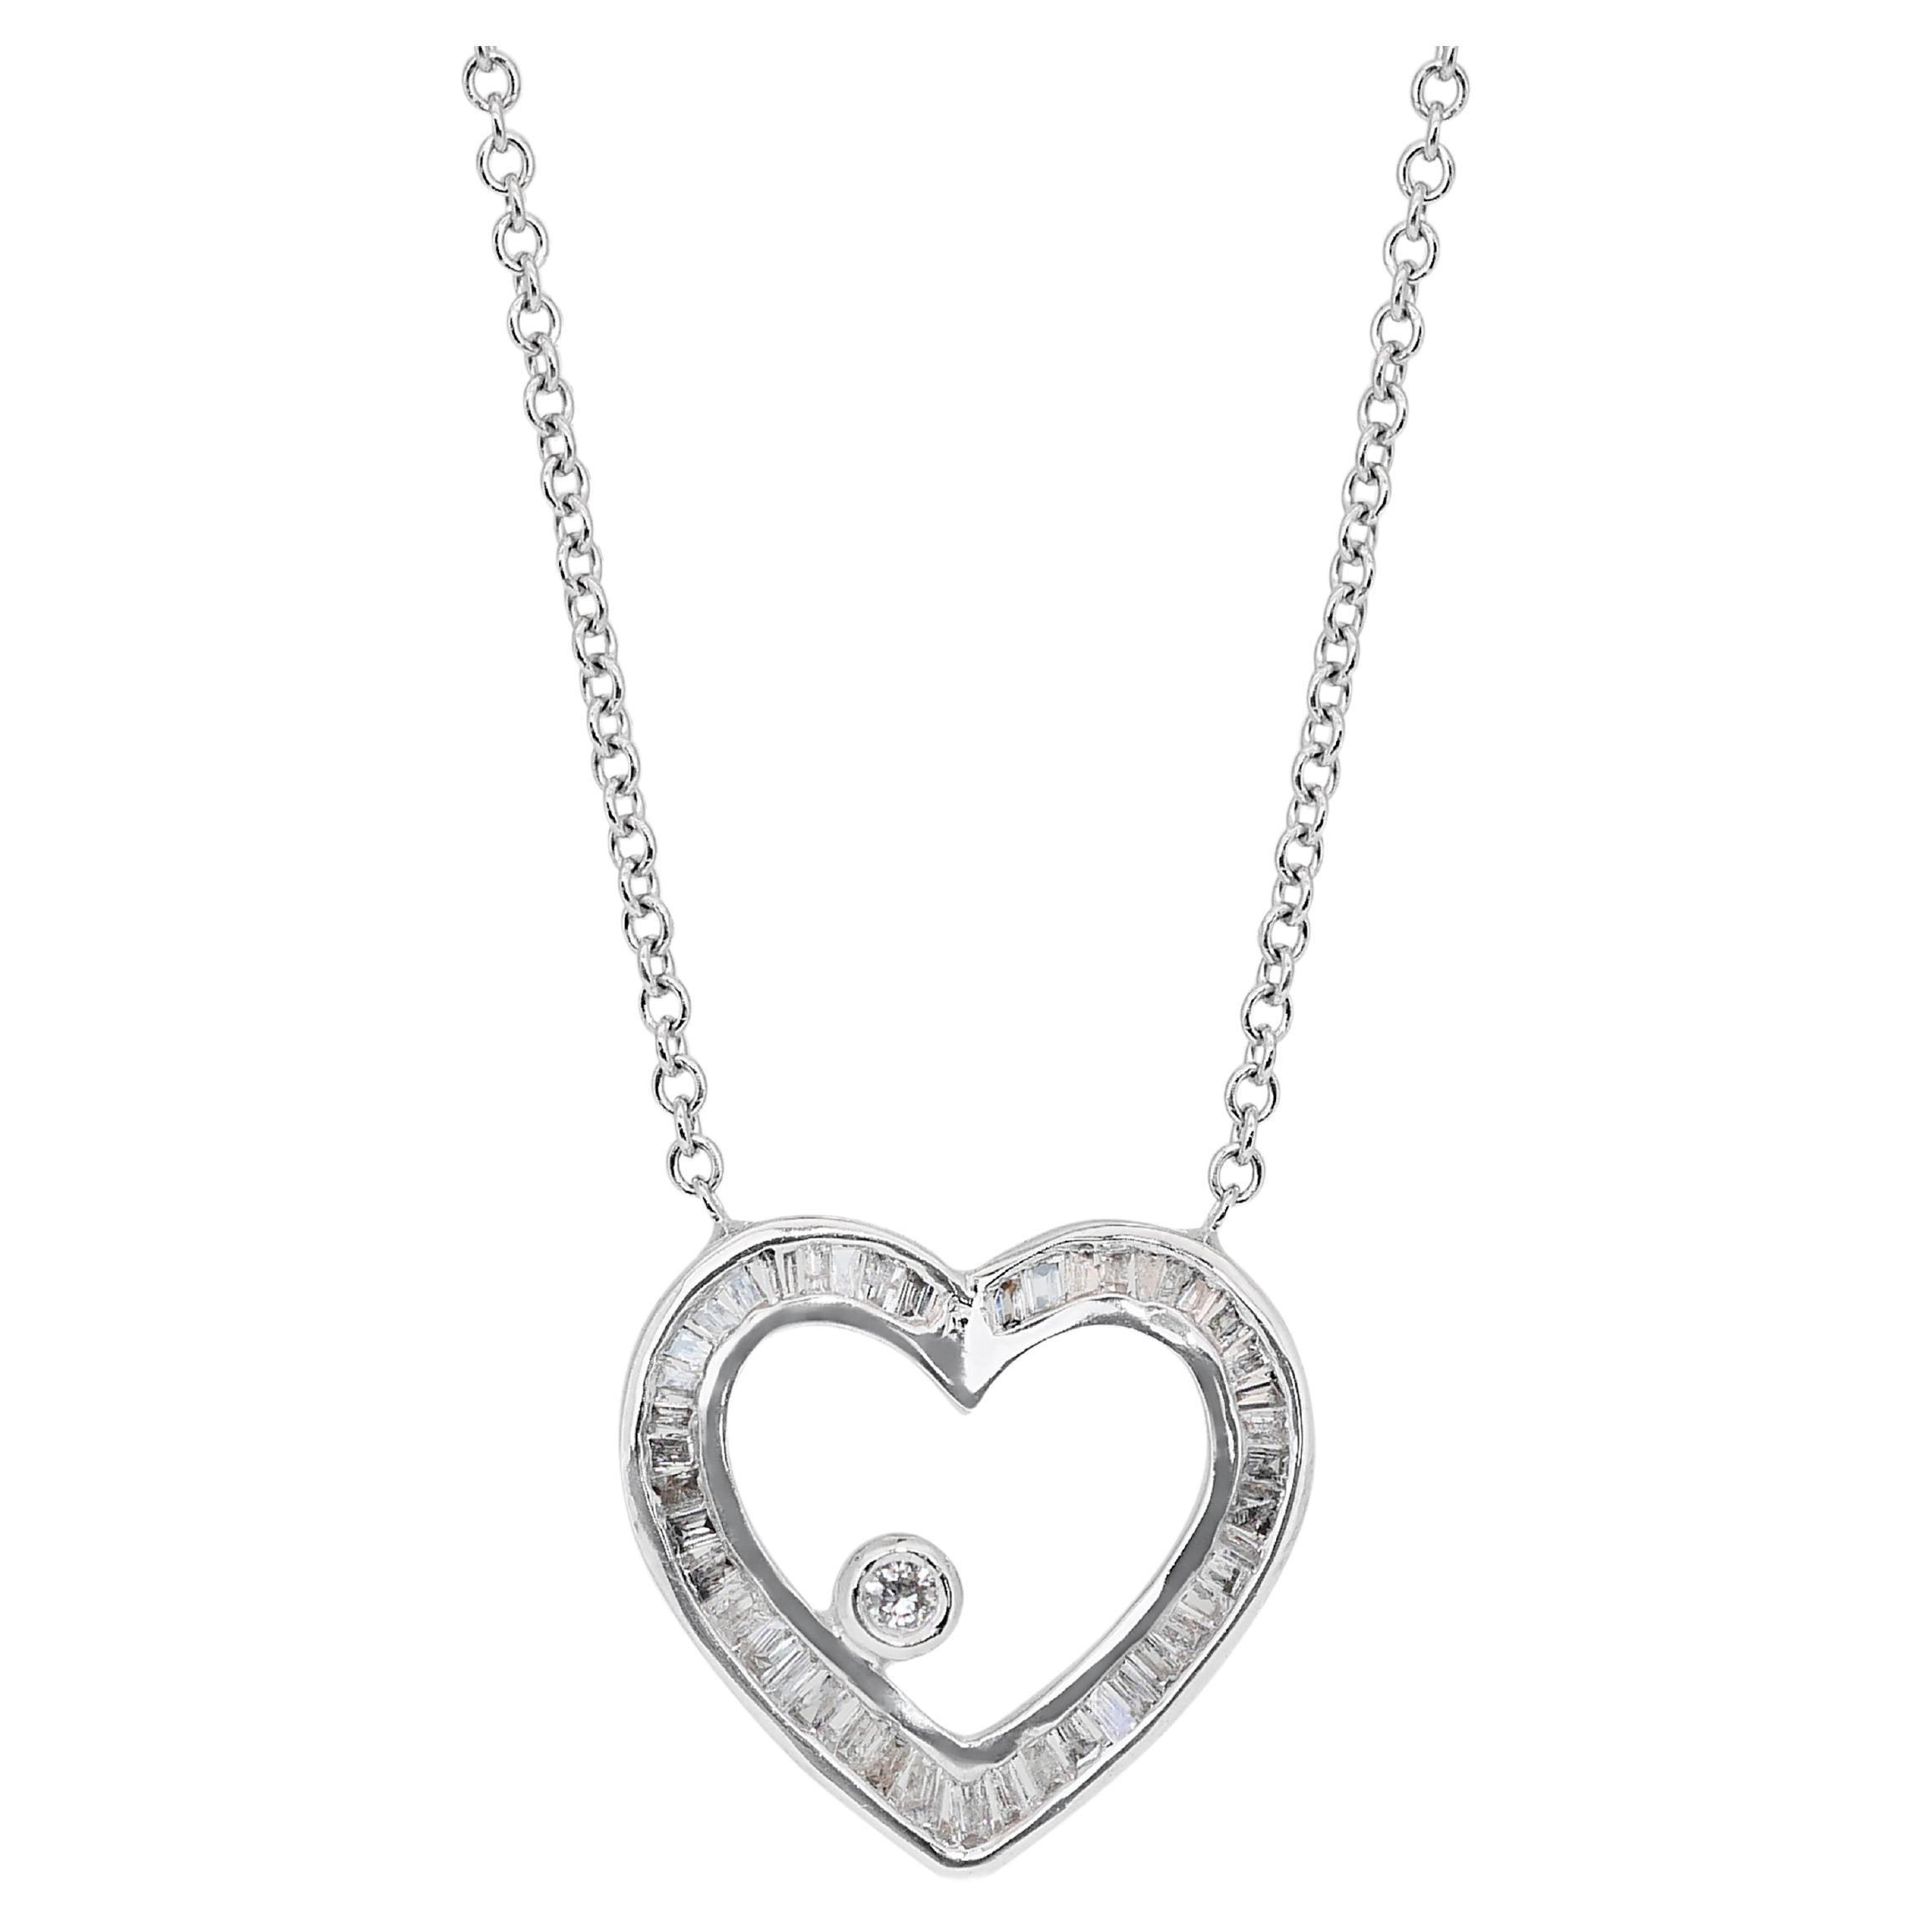 Captivating 0.53ct Diamonds Heart-Shaped Necklace in 18k White Gold - GIA 